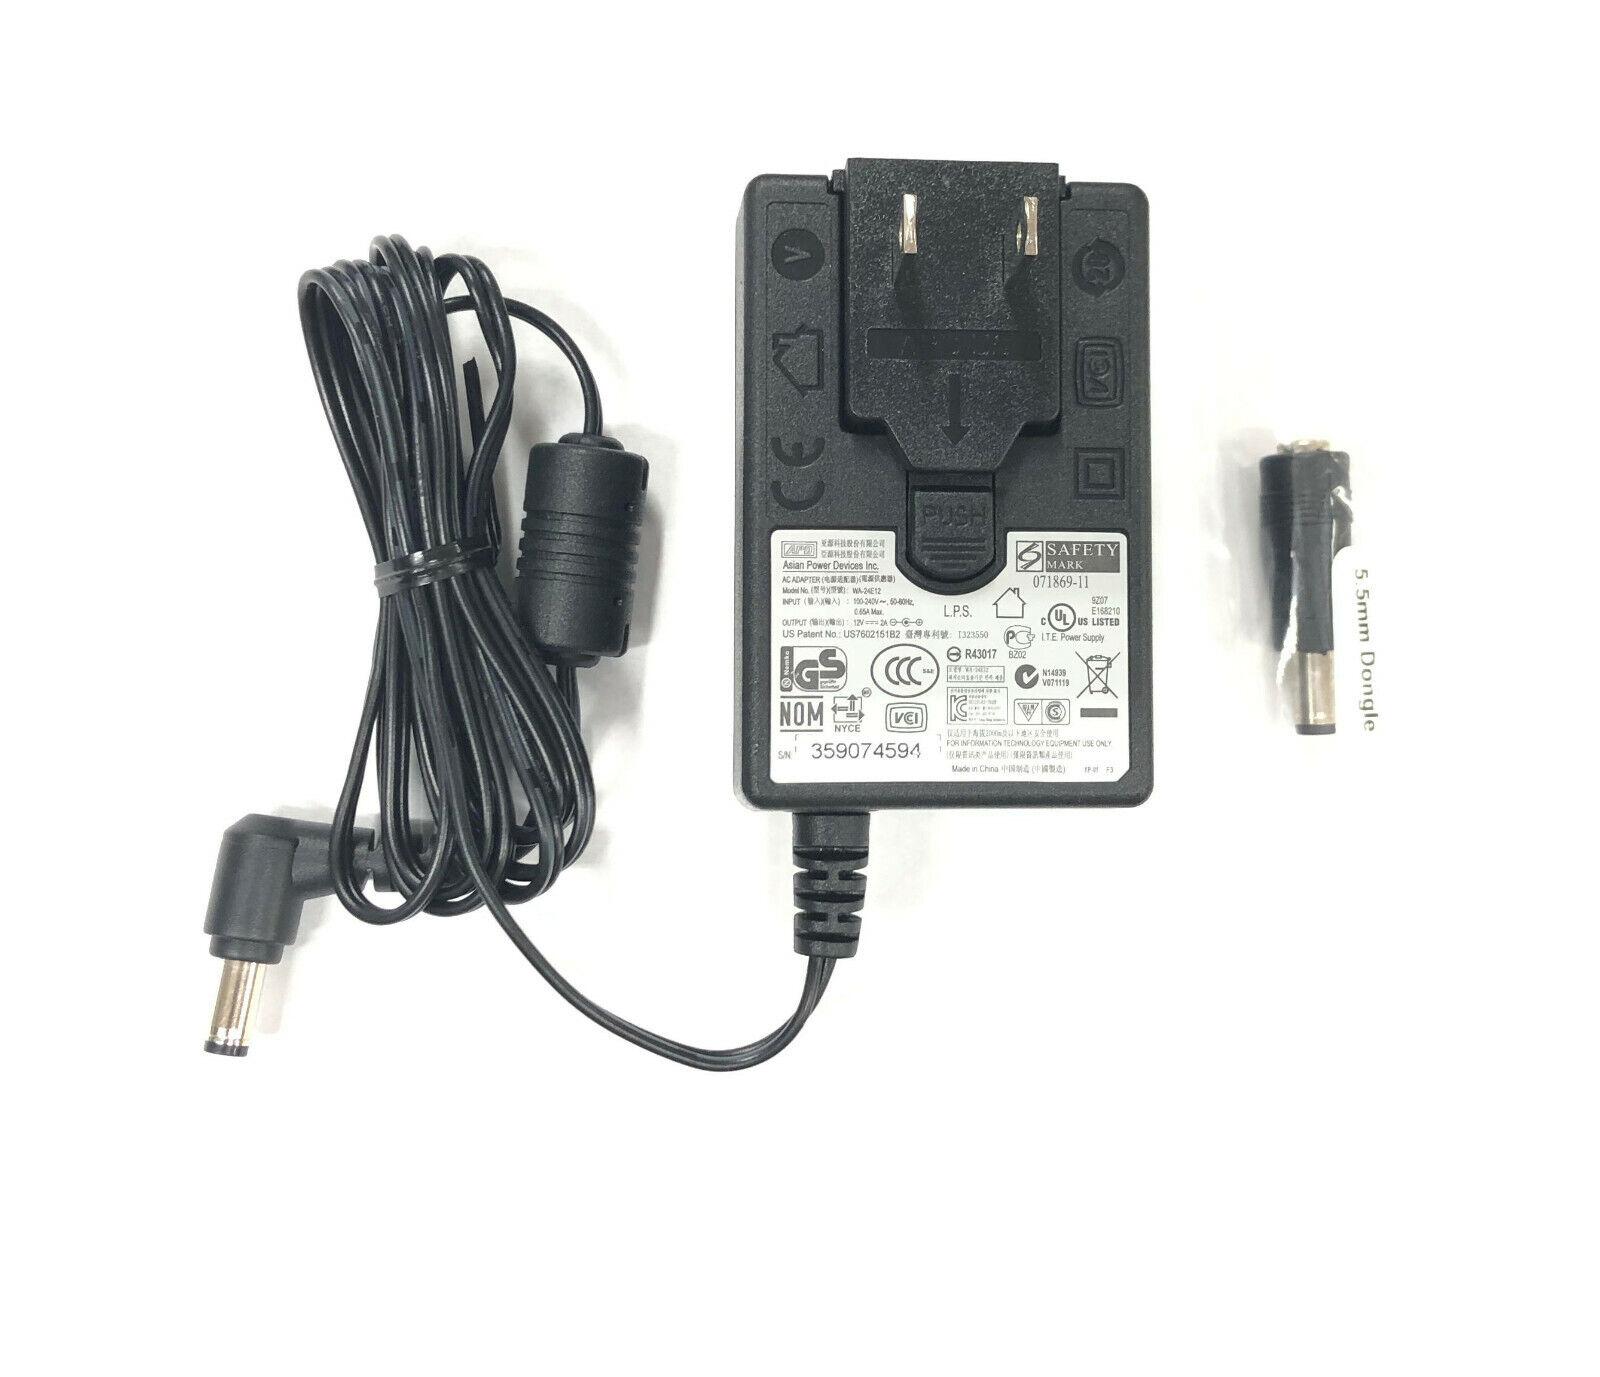 New Original APD 12V AC Adapter For WD My Book World Edition WD20000H1NC